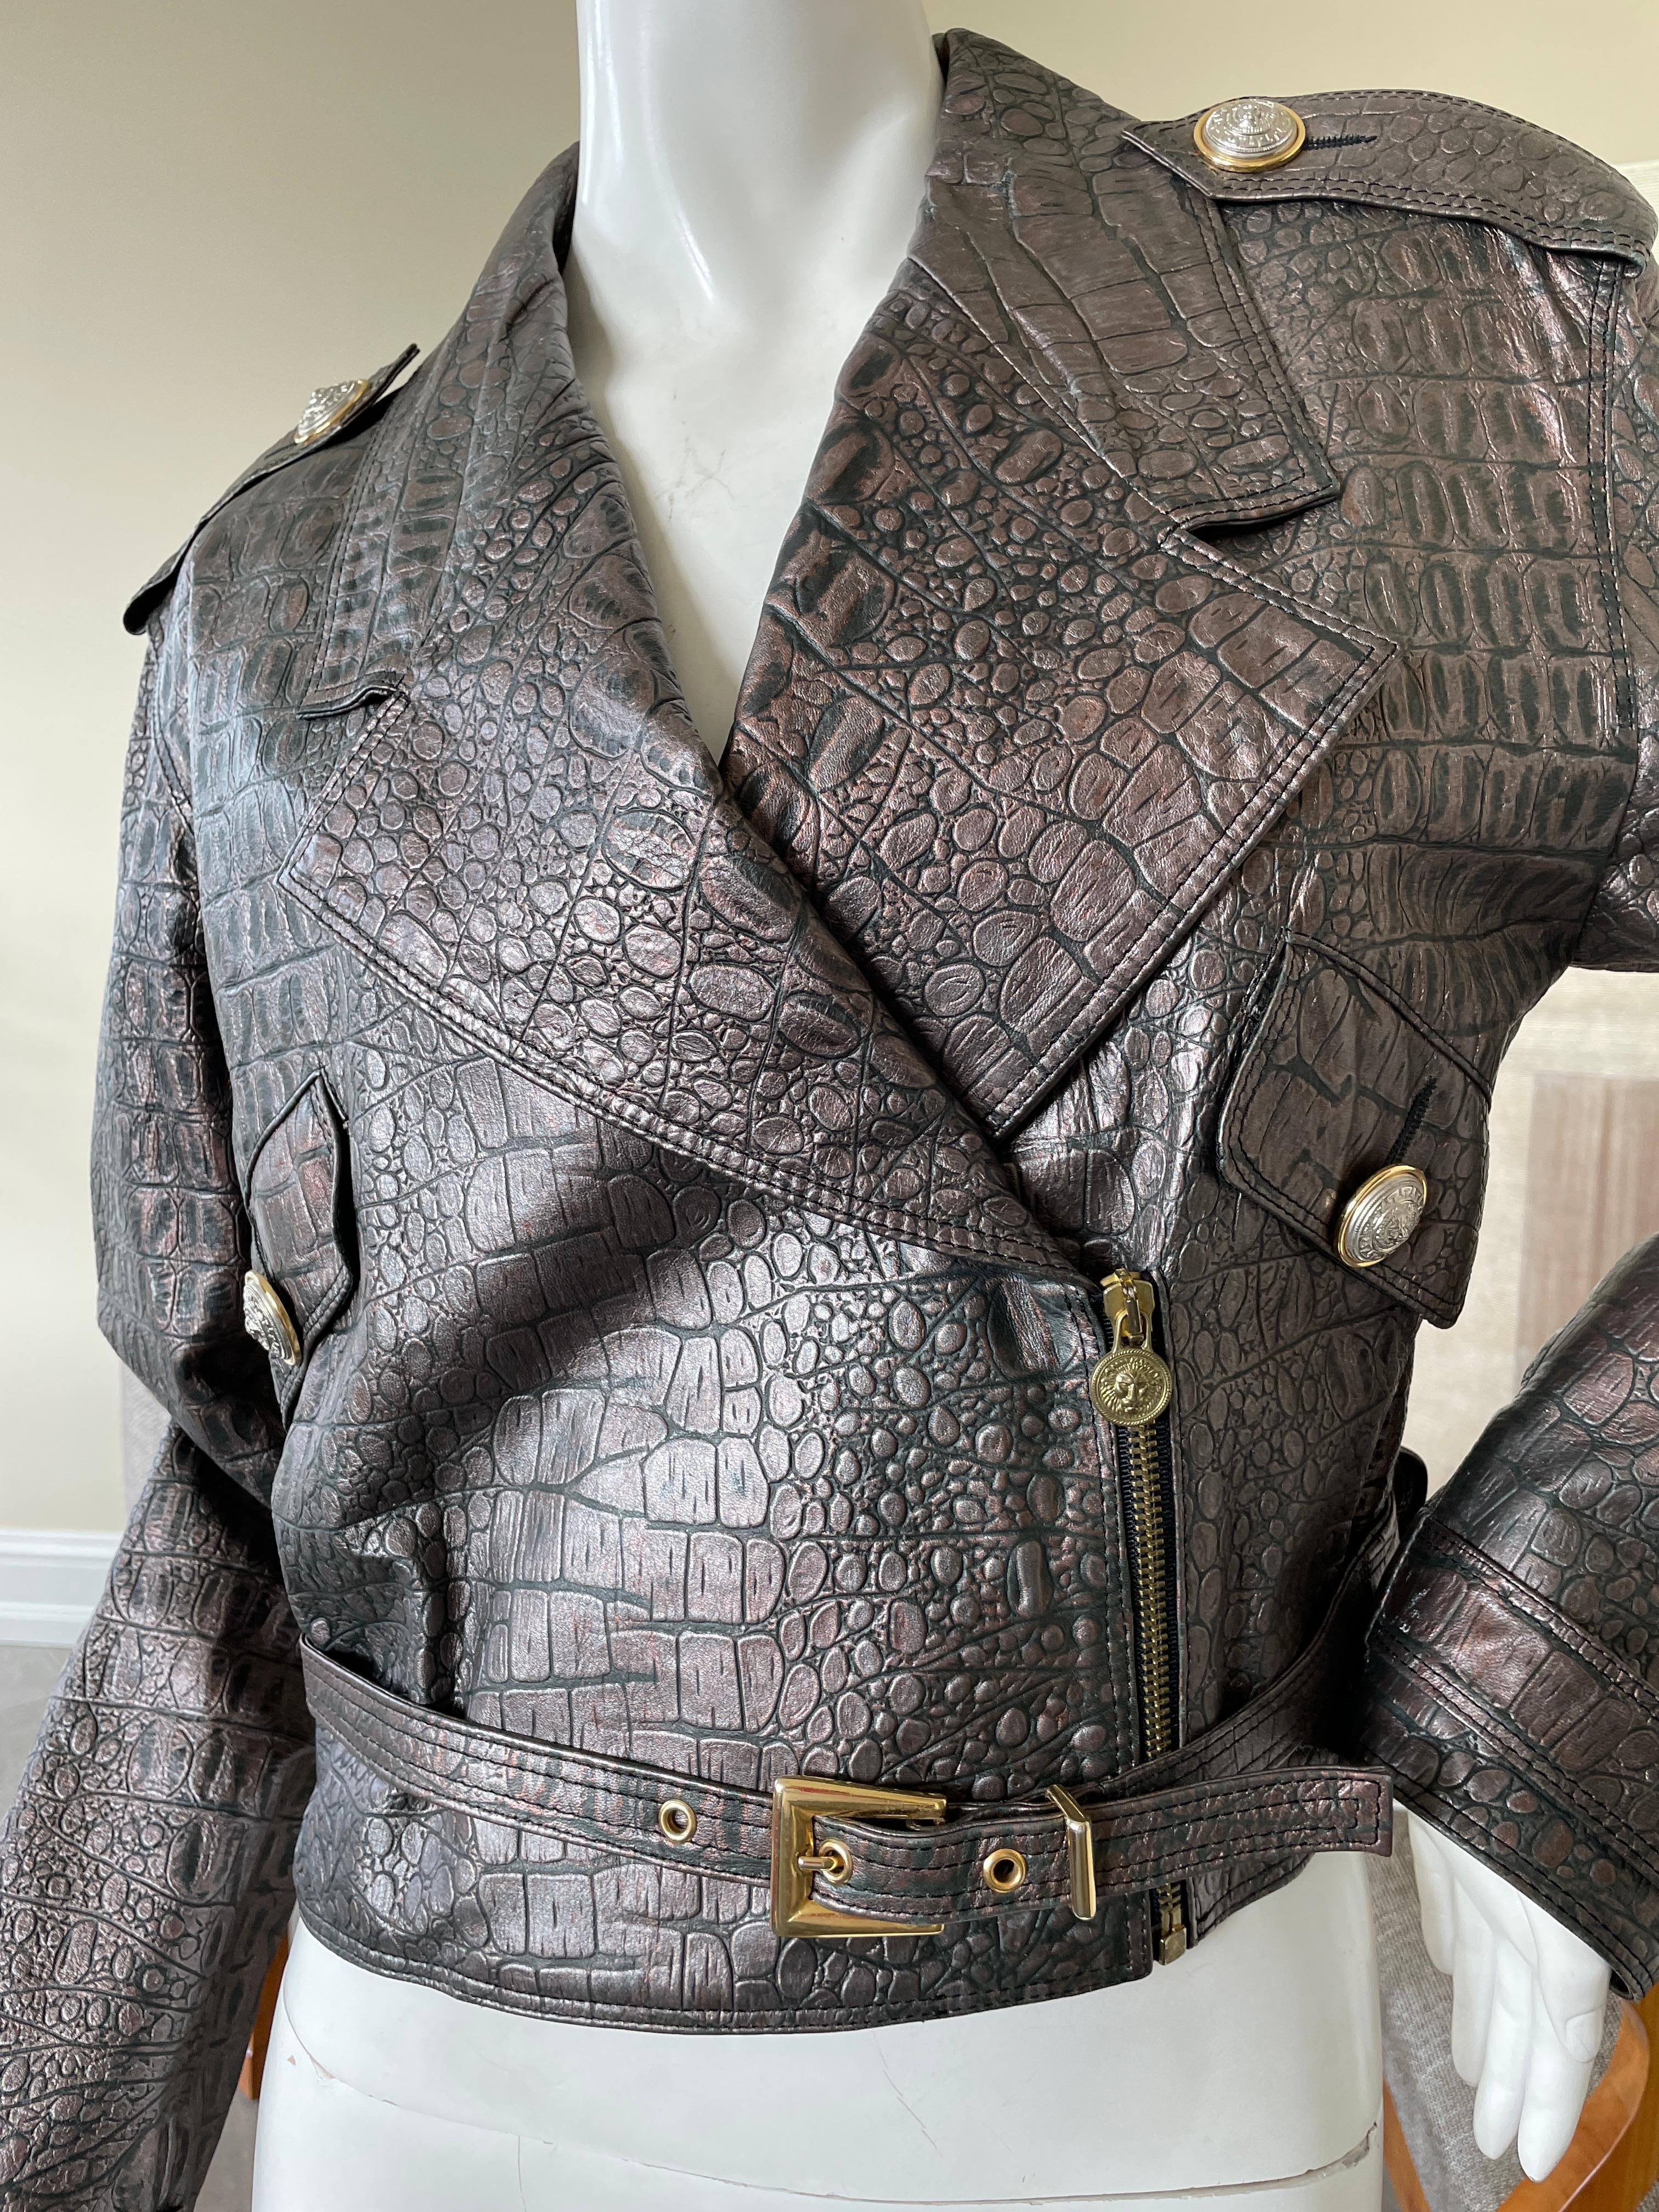 Gianni Versace Versus 1990 Gunmetal Gray Alligator Embossed Leather Moto Jacket  In Excellent Condition For Sale In Cloverdale, CA